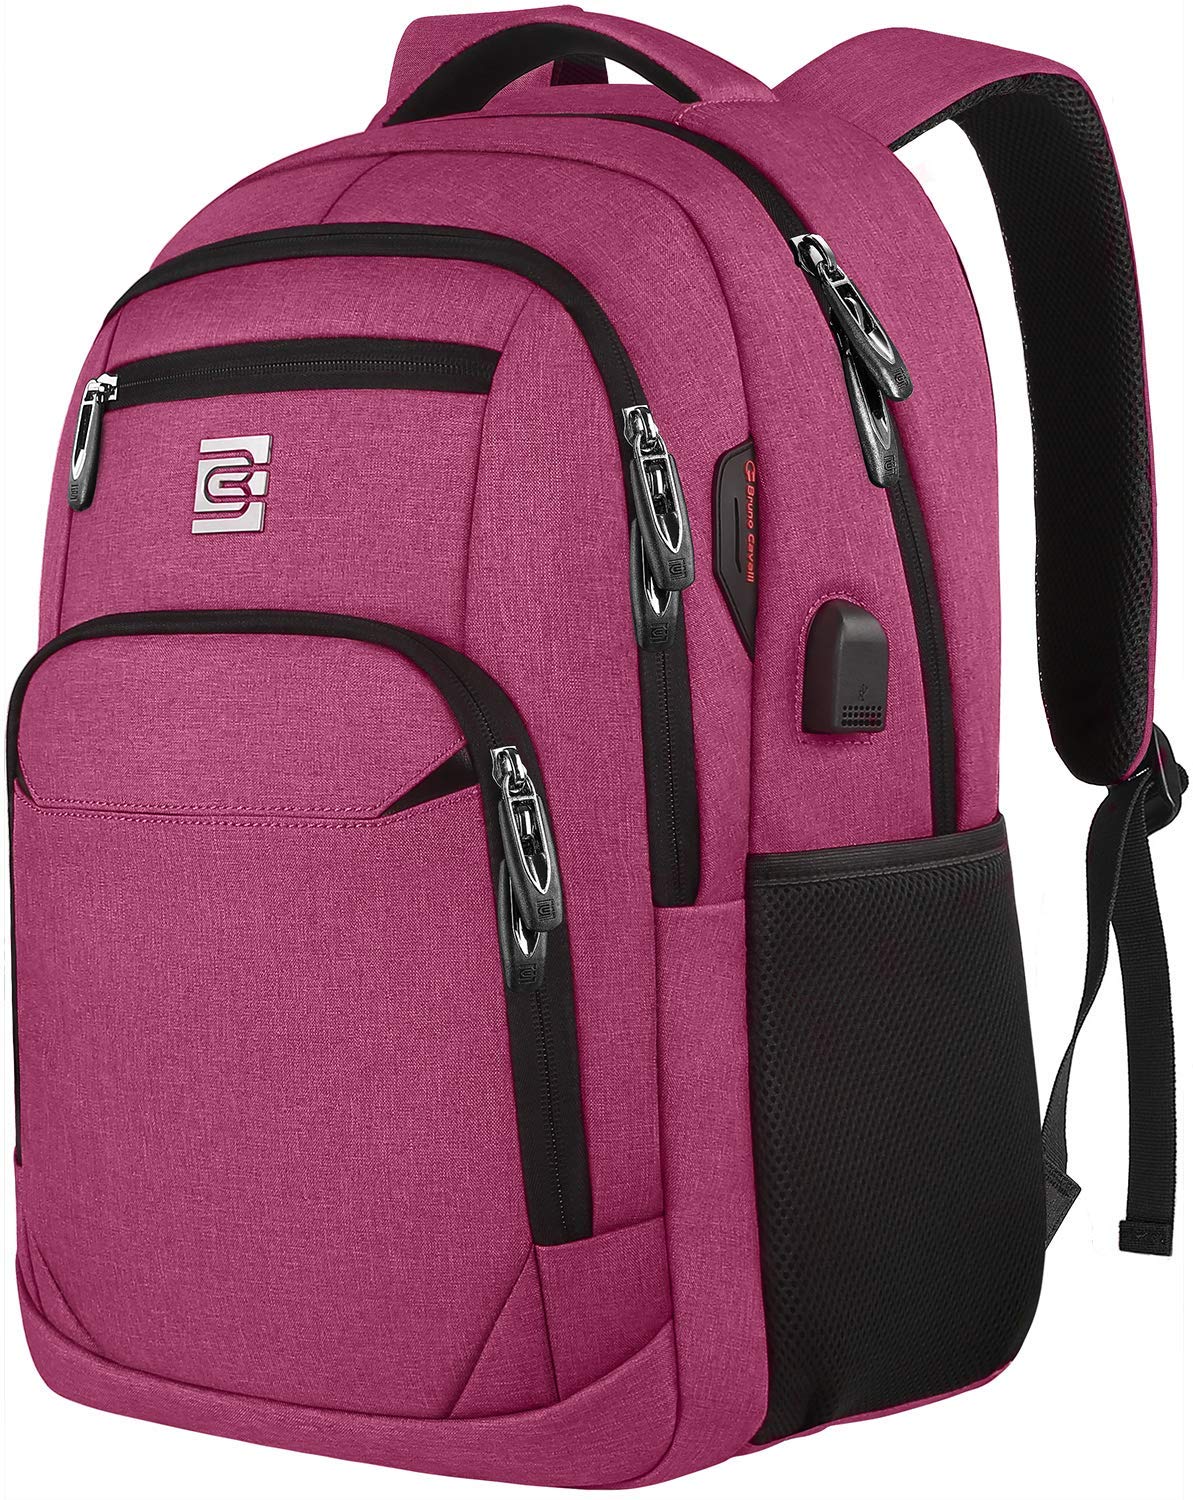 Dark pink backpack with black zippers and accents, as an example of the best teacher backpacks